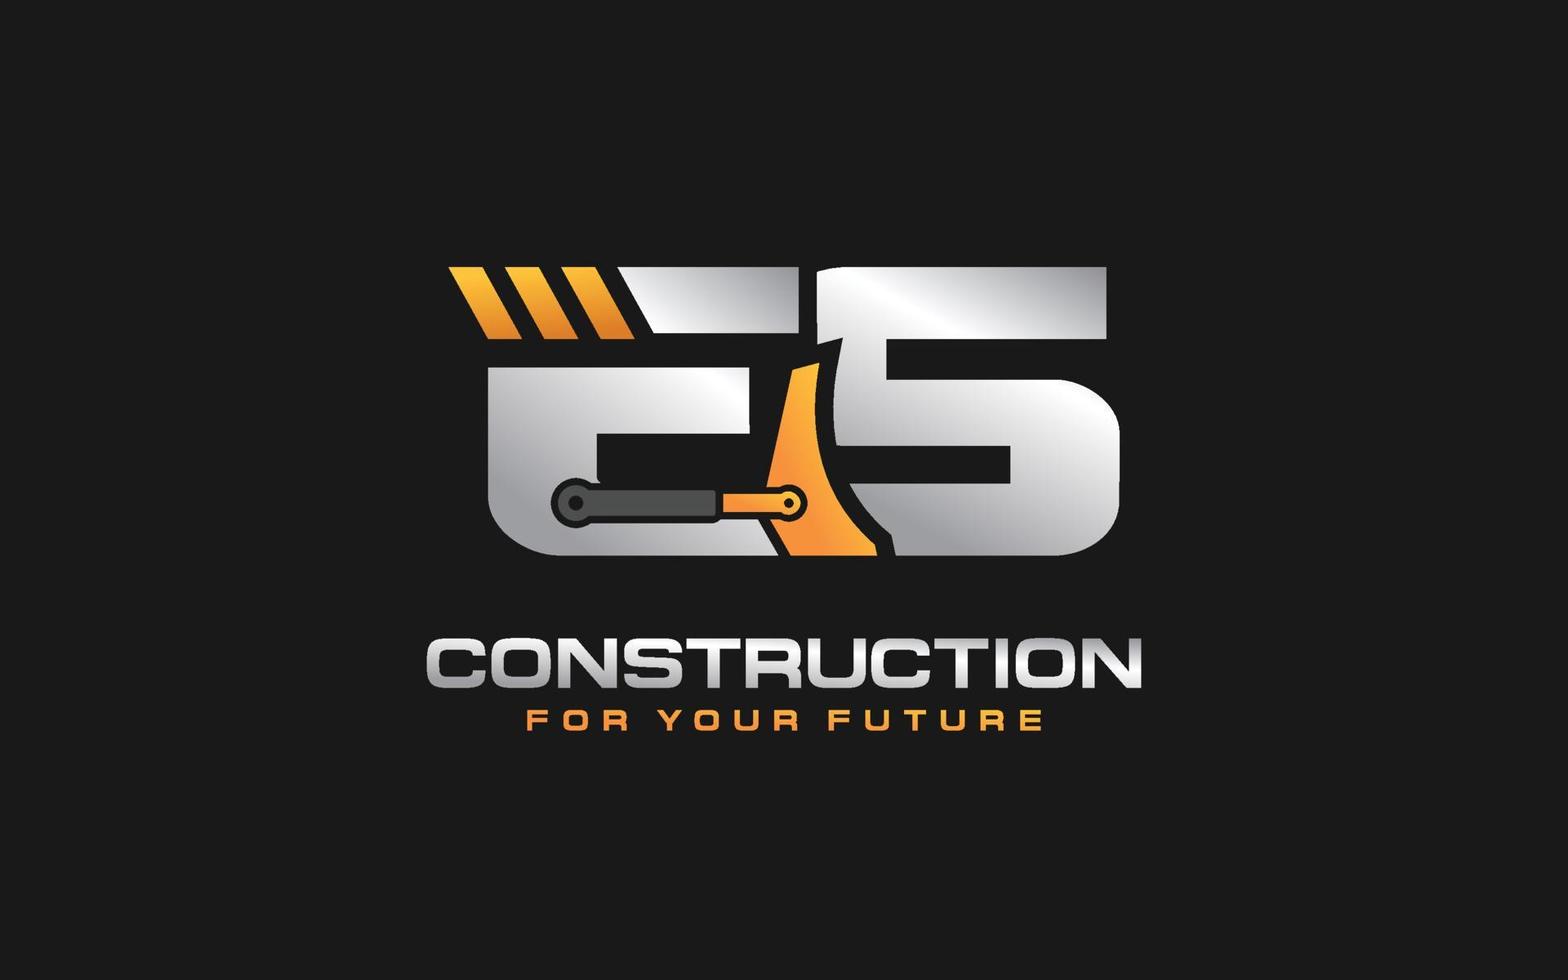 ES logo excavator for construction company. Heavy equipment template vector illustration for your brand.